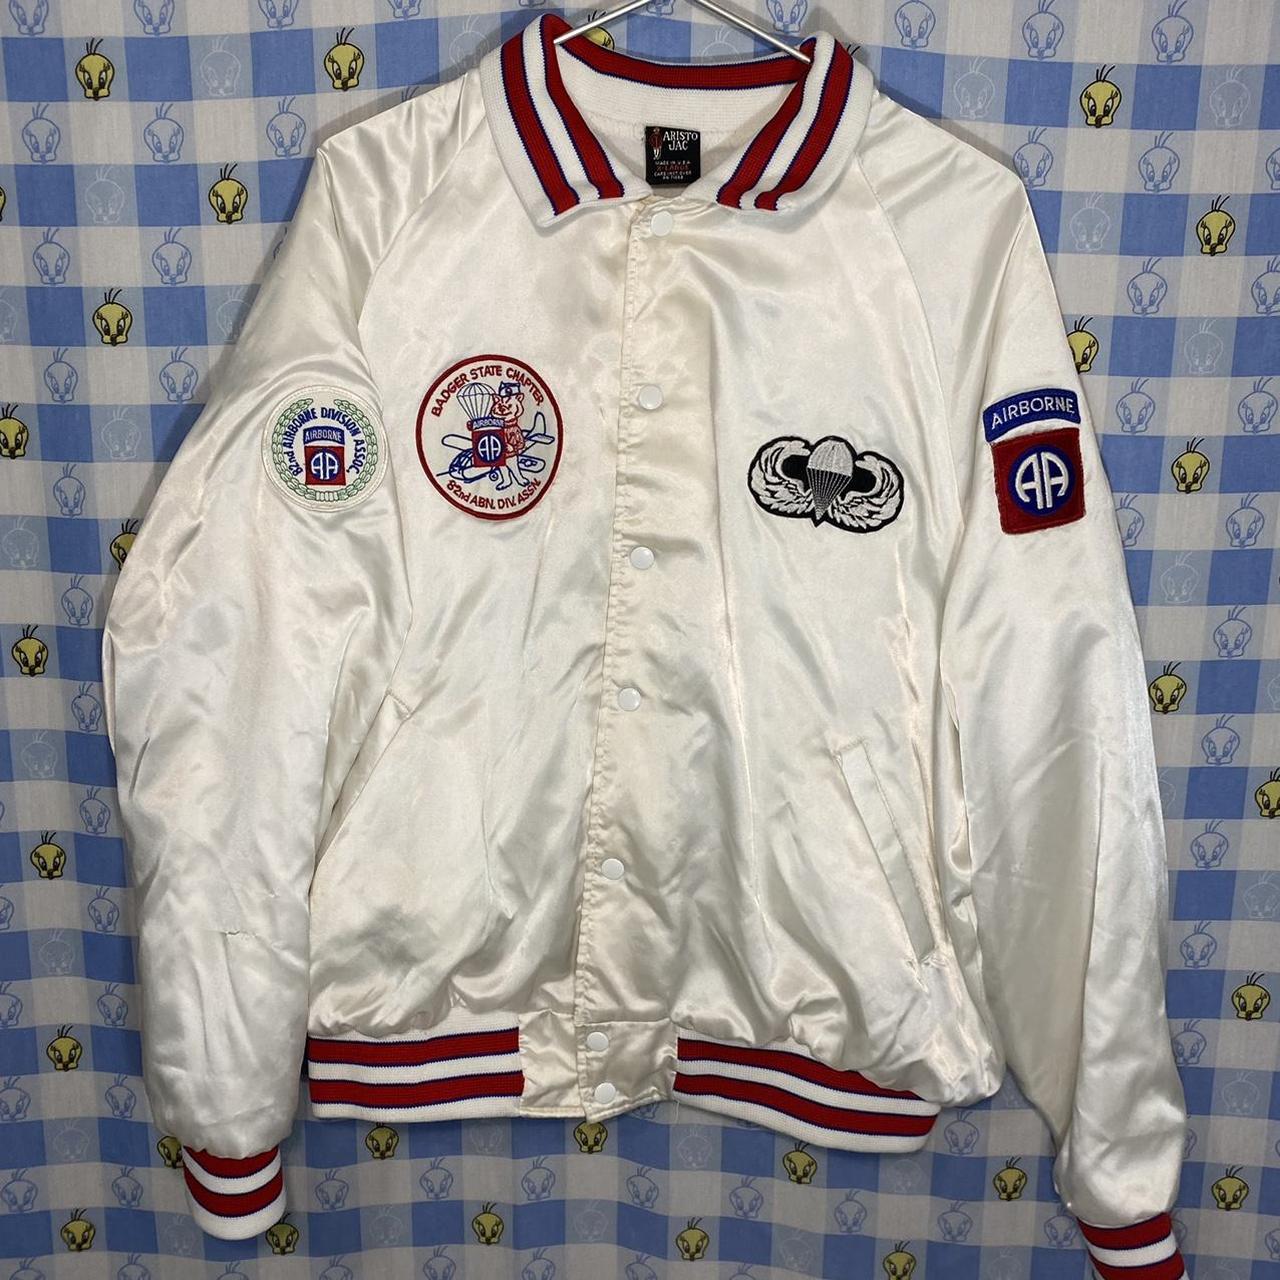 Aristoc Men's White and Red Jacket